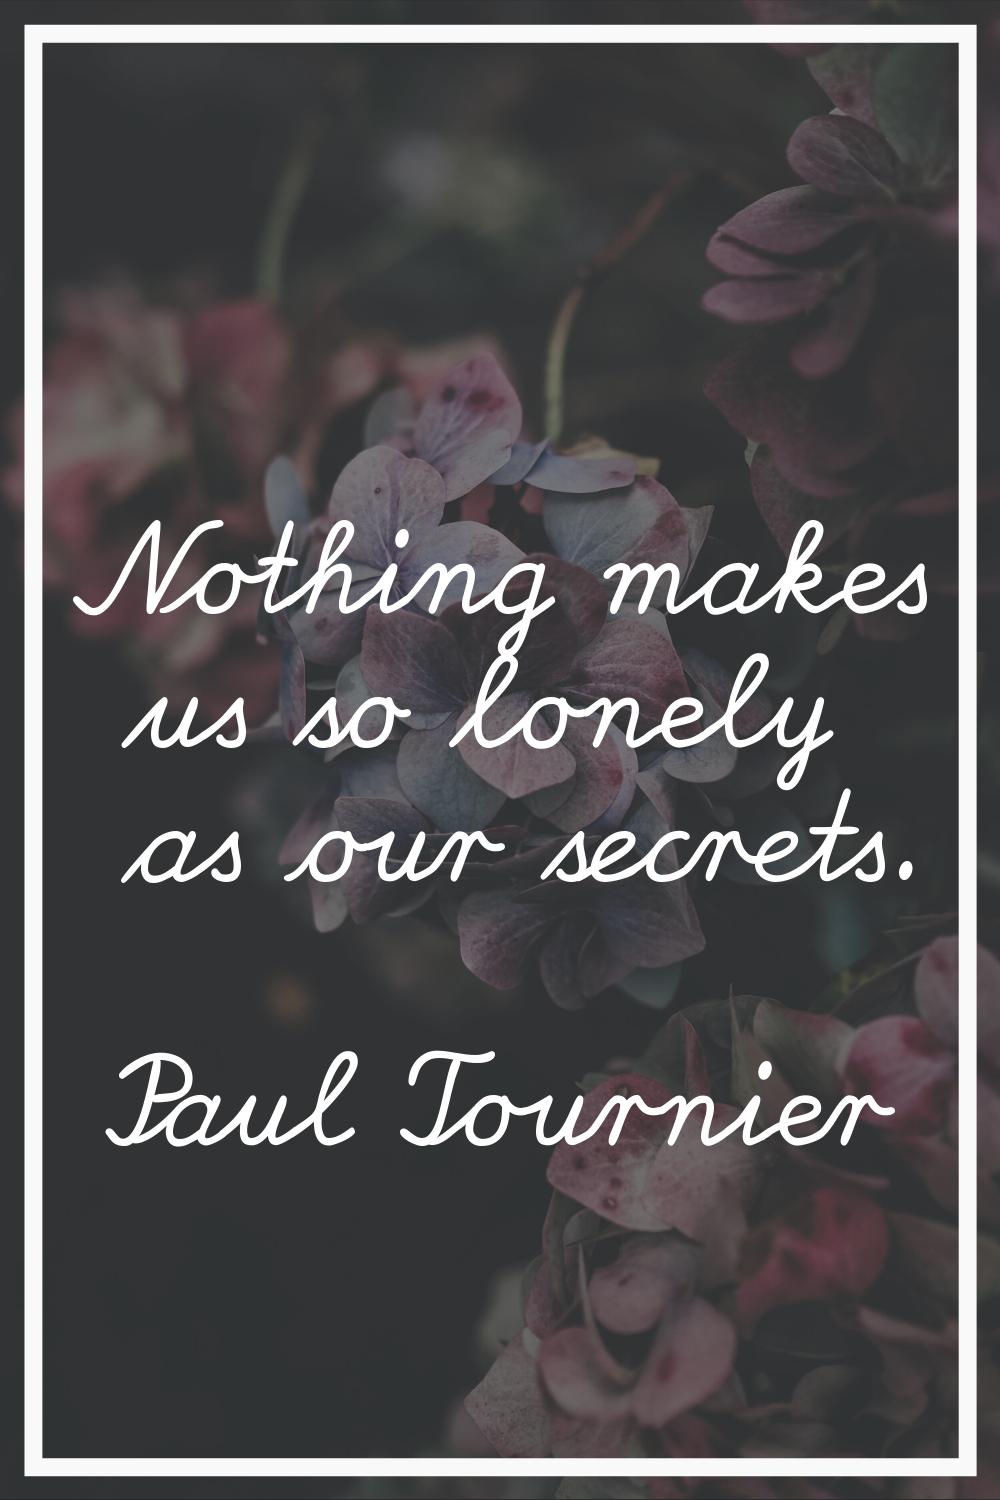 Nothing makes us so lonely as our secrets.